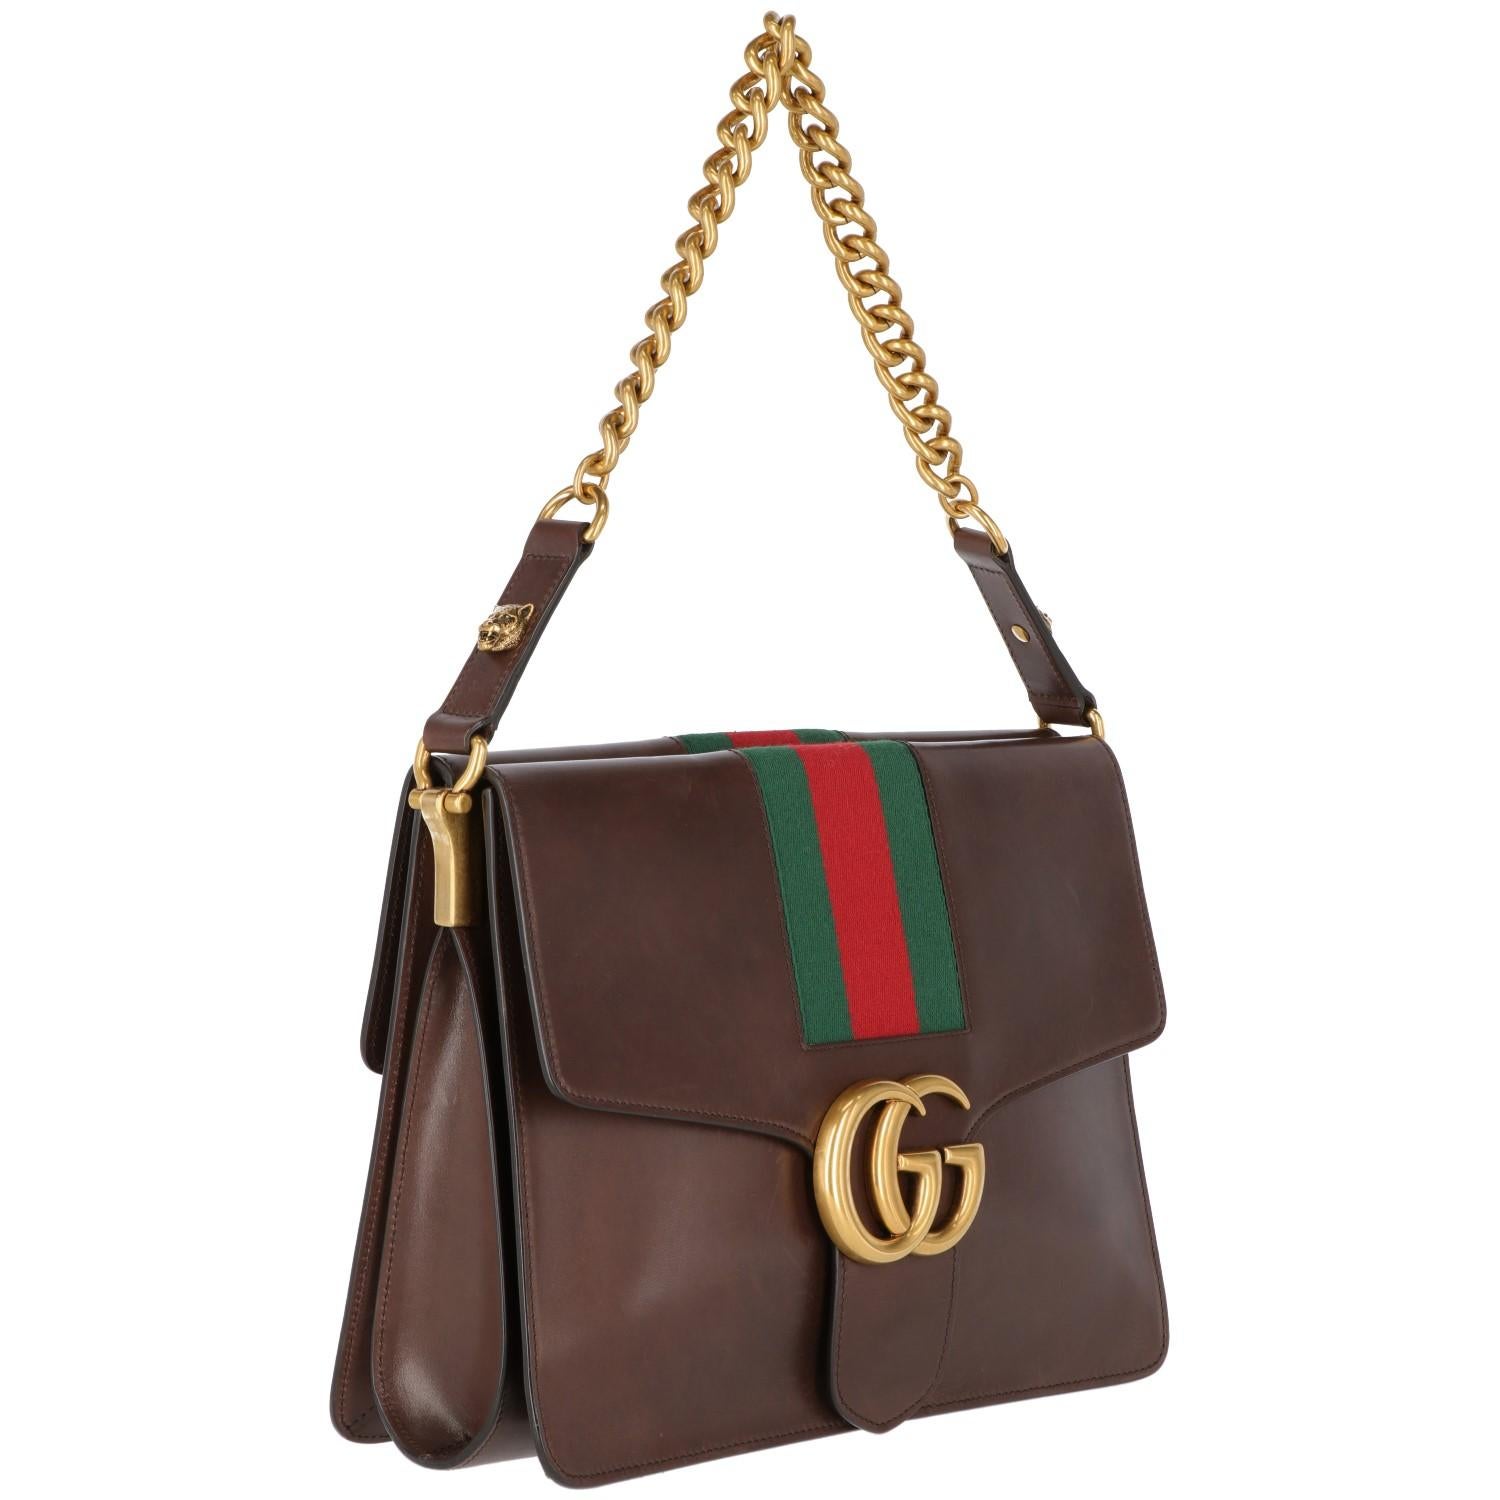 The iconic red and green central stripe Gucci bag, recently produced,  features a gold-tone front logo and fancy lion decorative details on shoulder strap. With two large pockets on both sides, an elegant green leather lining and the shiny gold-tone